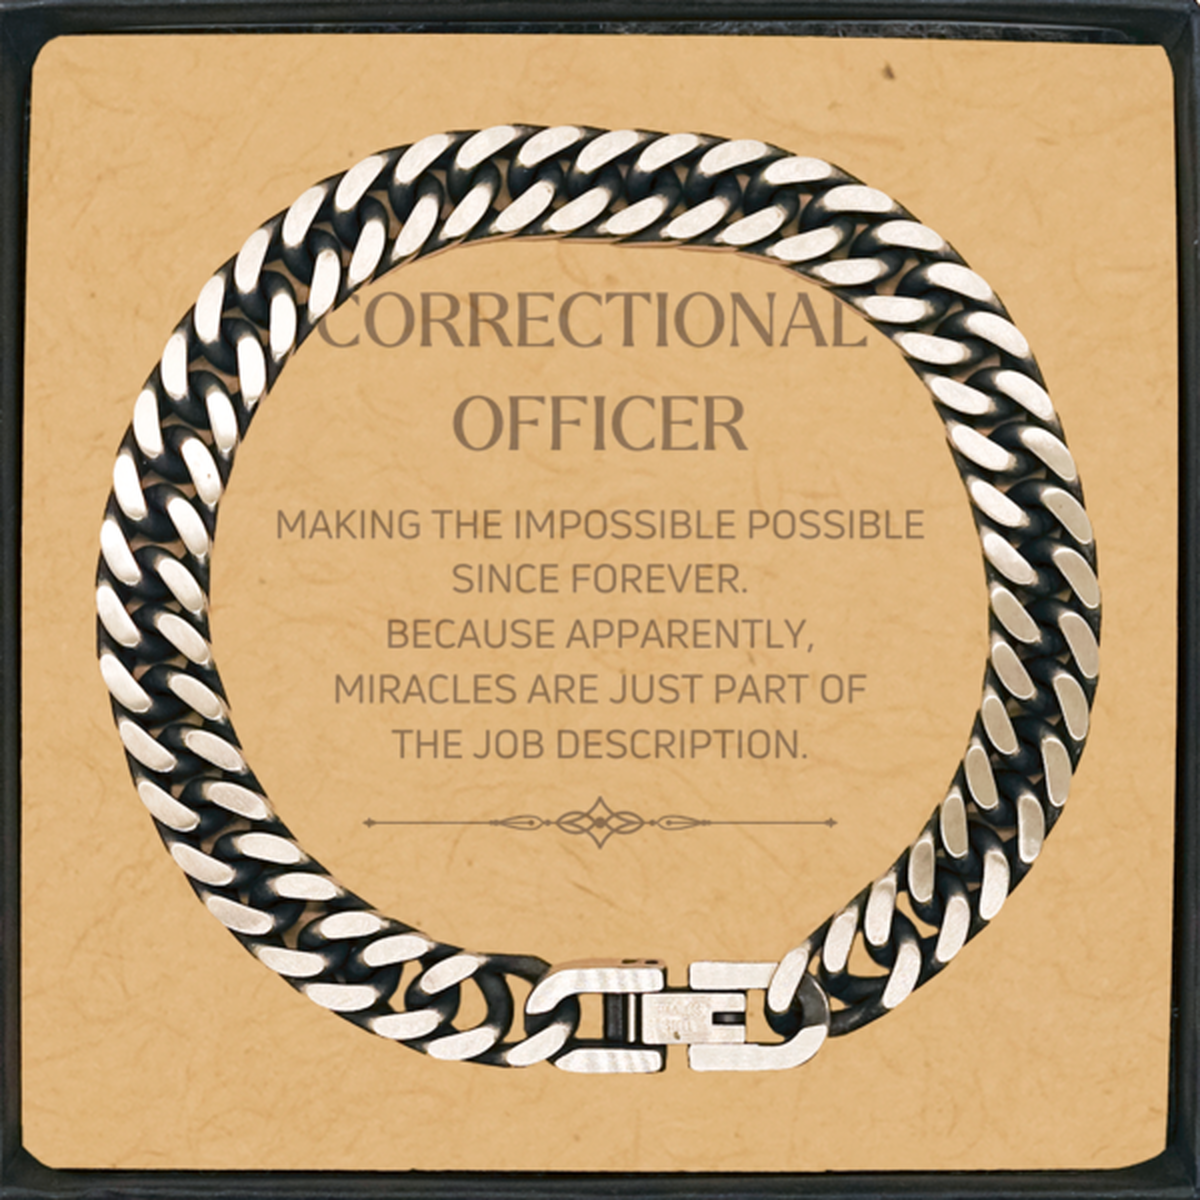 Funny Correctional Officer Gifts, Miracles are just part of the job description, Inspirational Birthday Cuban Link Chain Bracelet For Correctional Officer, Men, Women, Coworkers, Friends, Boss